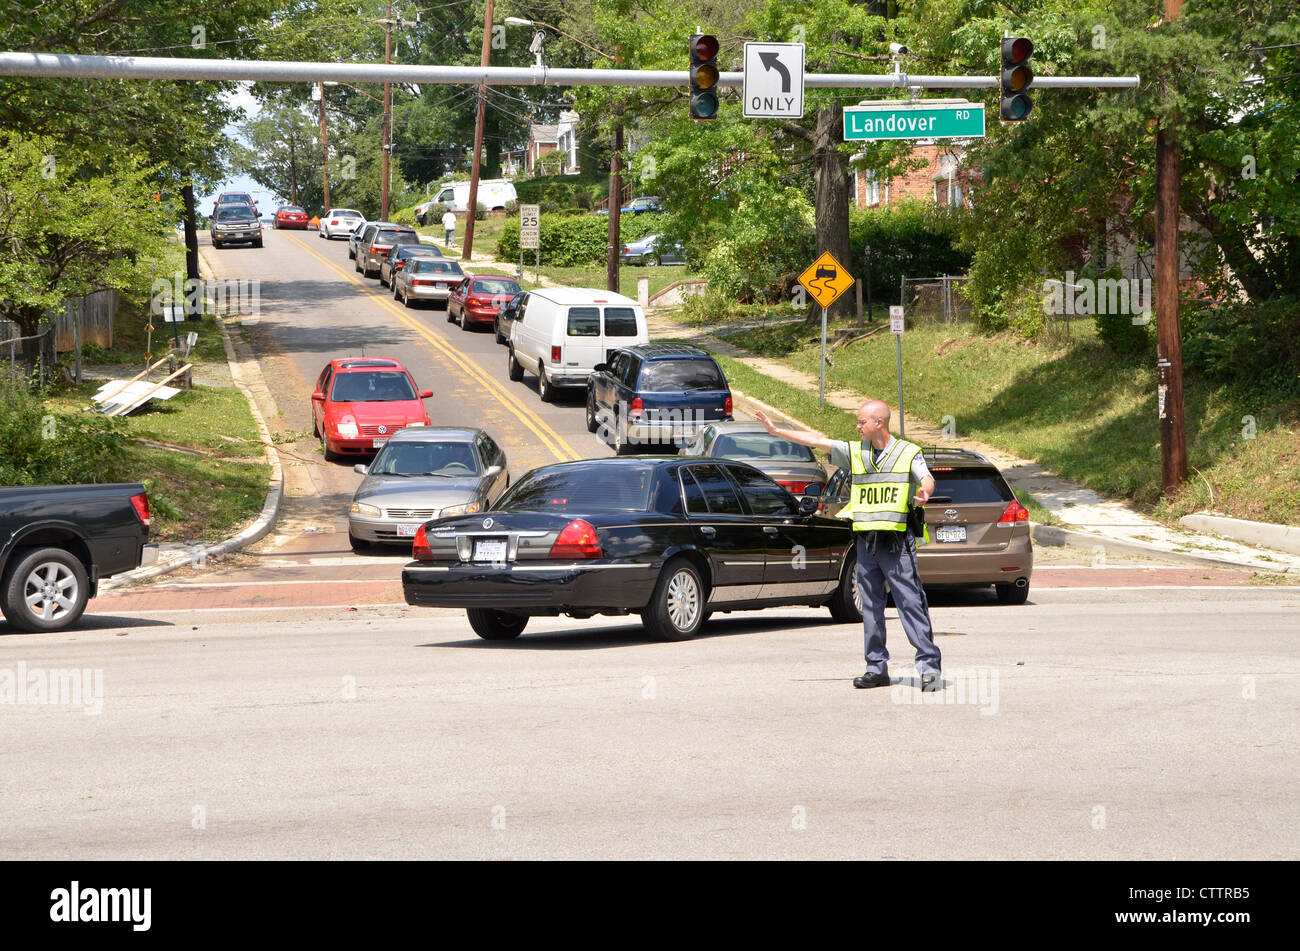 police directing traffic after a power failure knocked out the traffic lights at an intersection in Bladensburg, Maryland Stock Photo